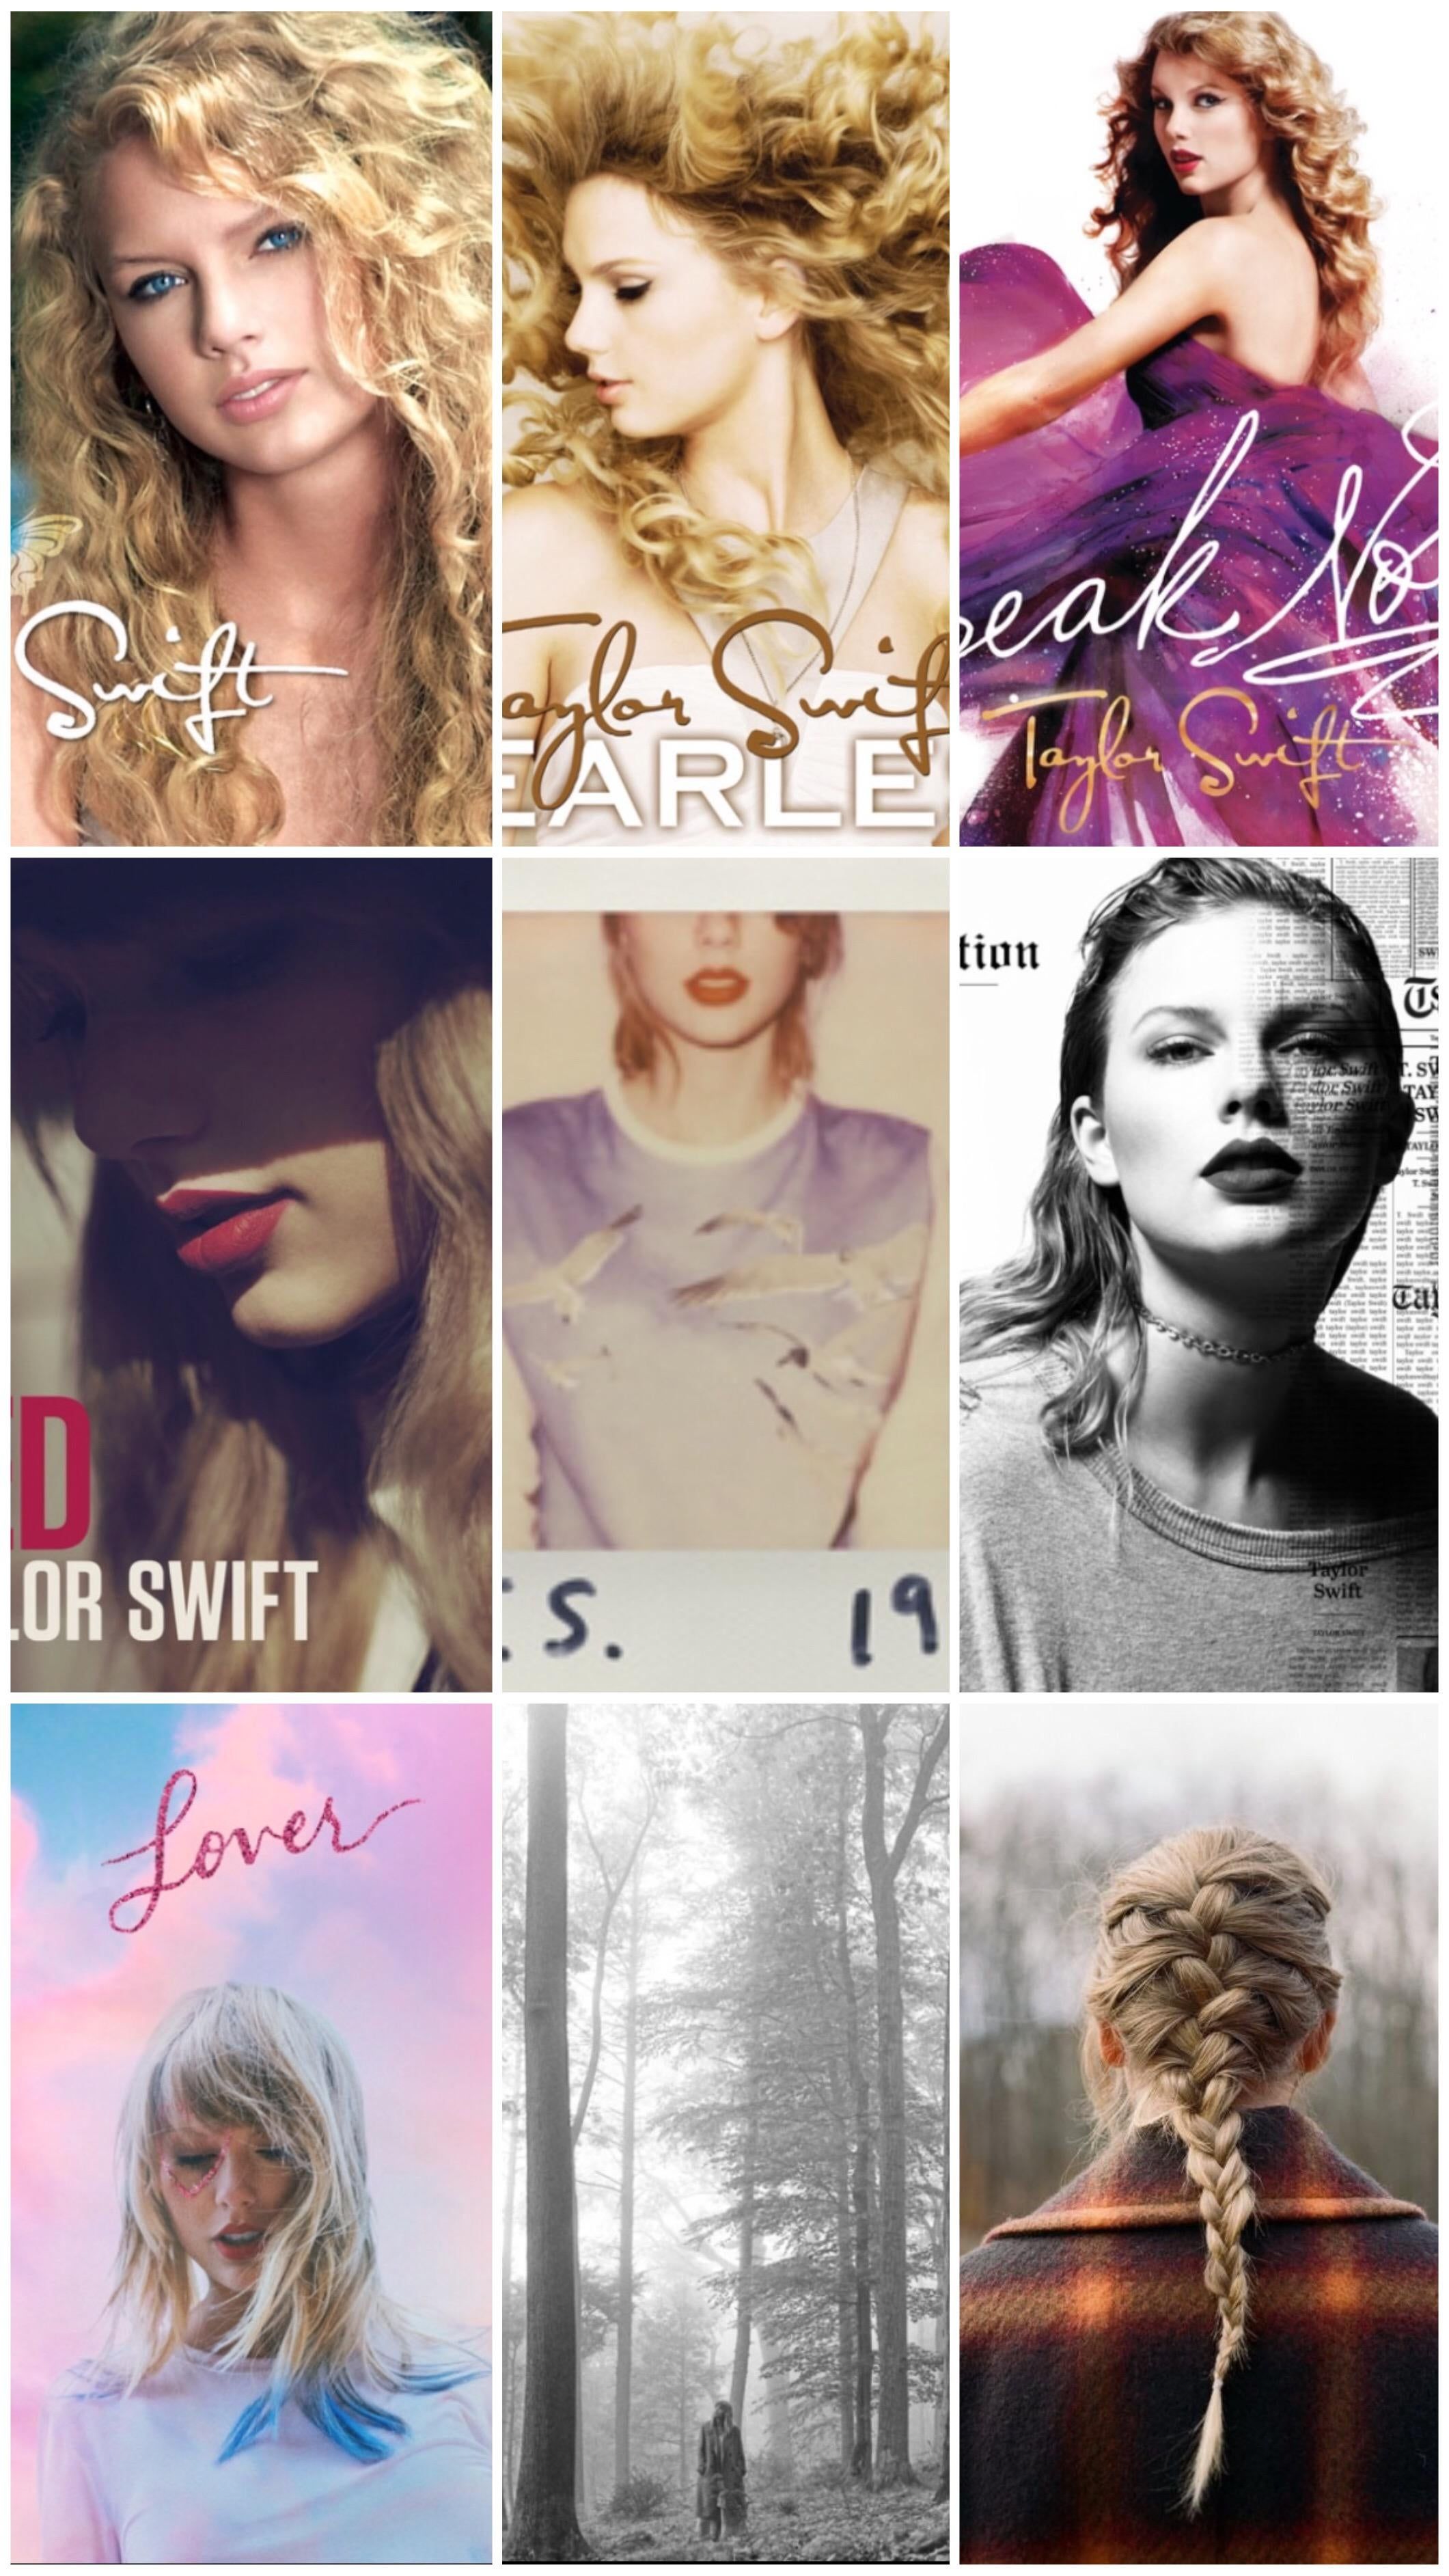 Taylor Swift album covers from her first album to her latest album Lover. - Taylor Swift